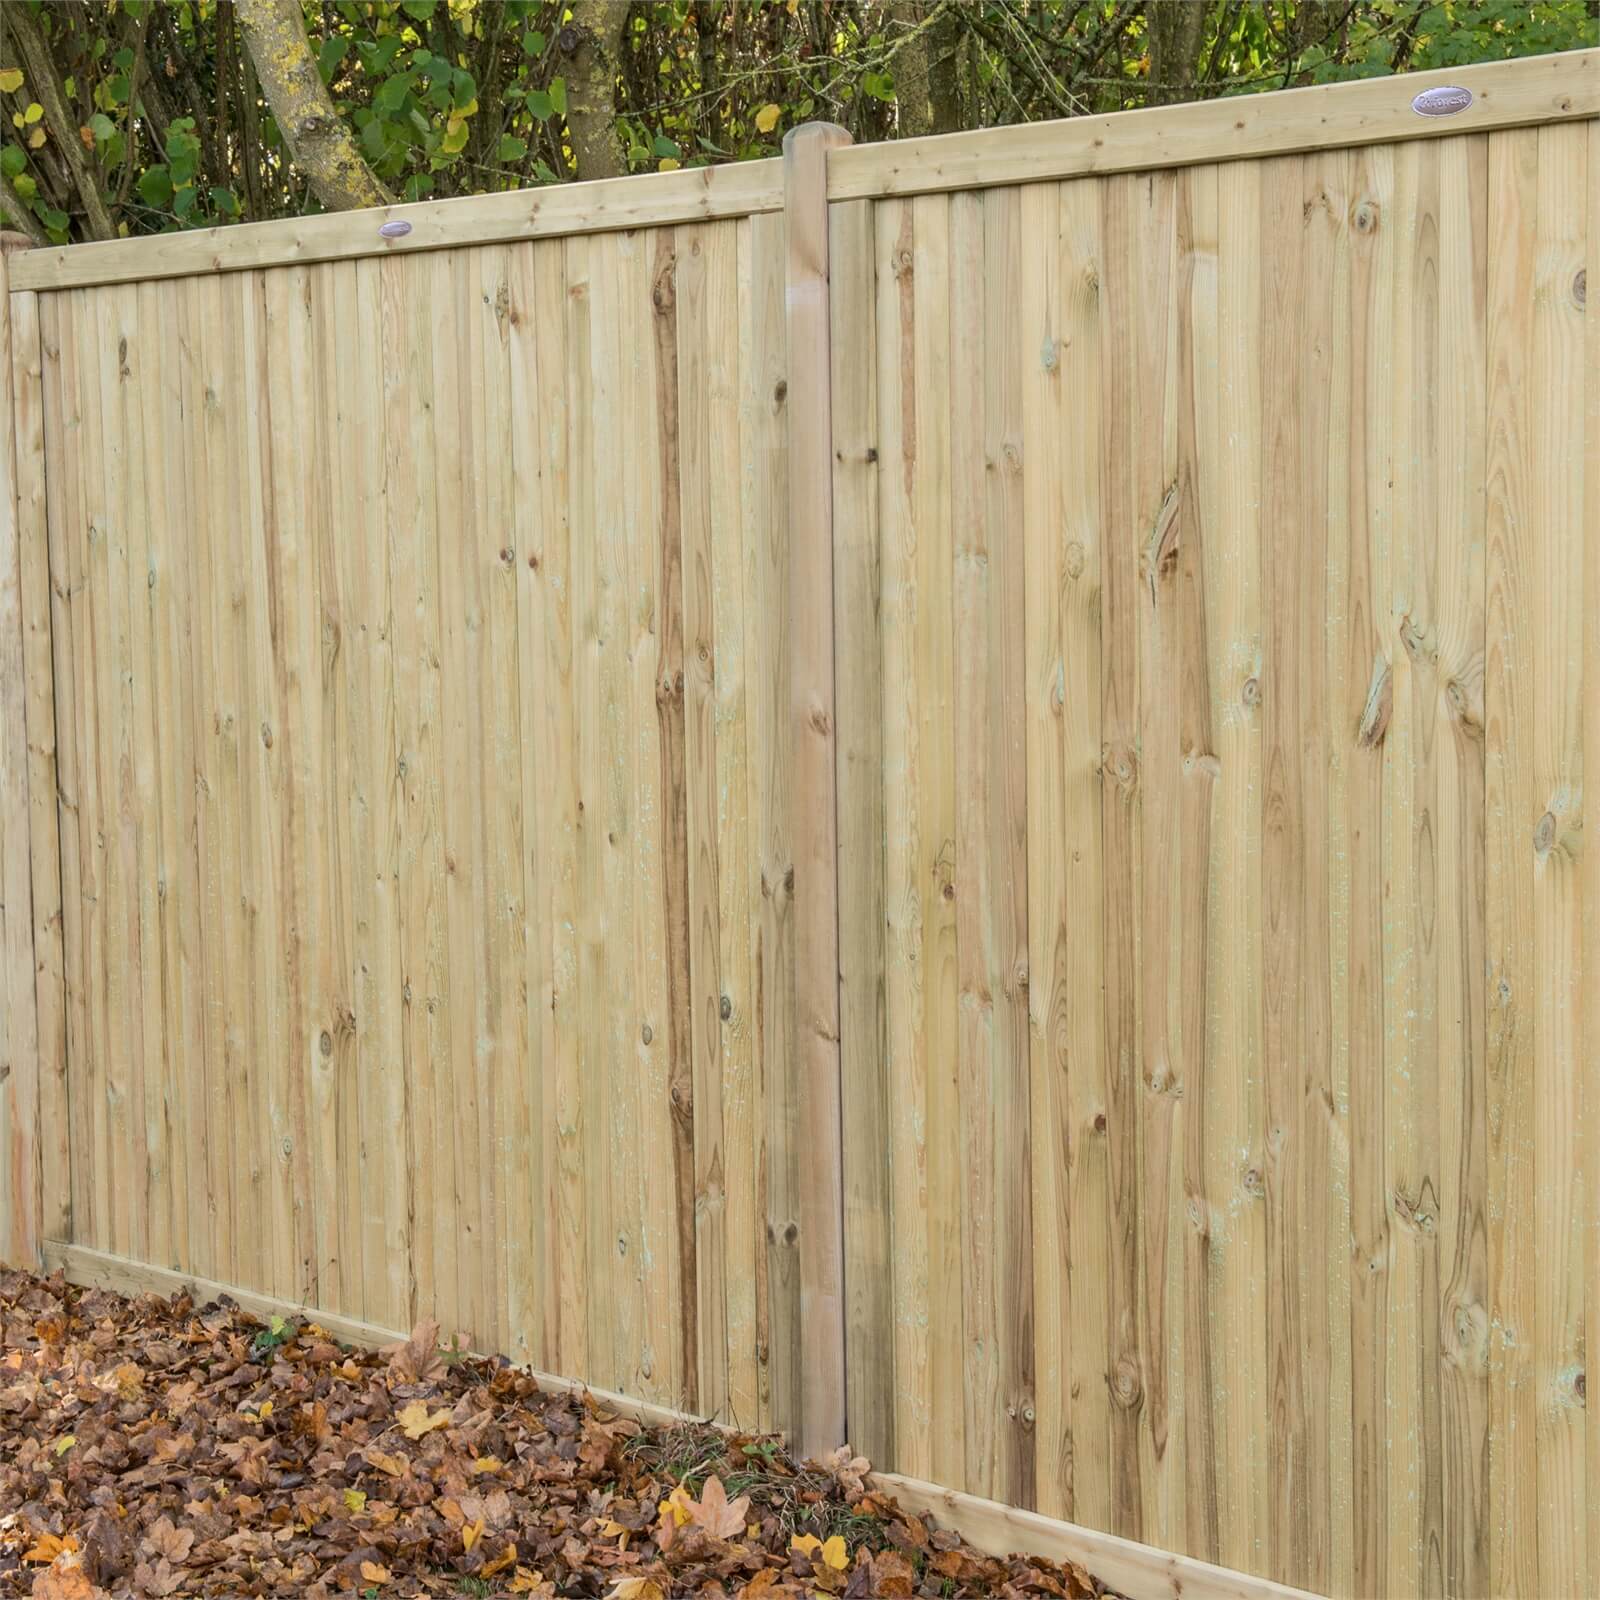 Forest Noise Reduction Fence Panel - 6ft - Pack of 3